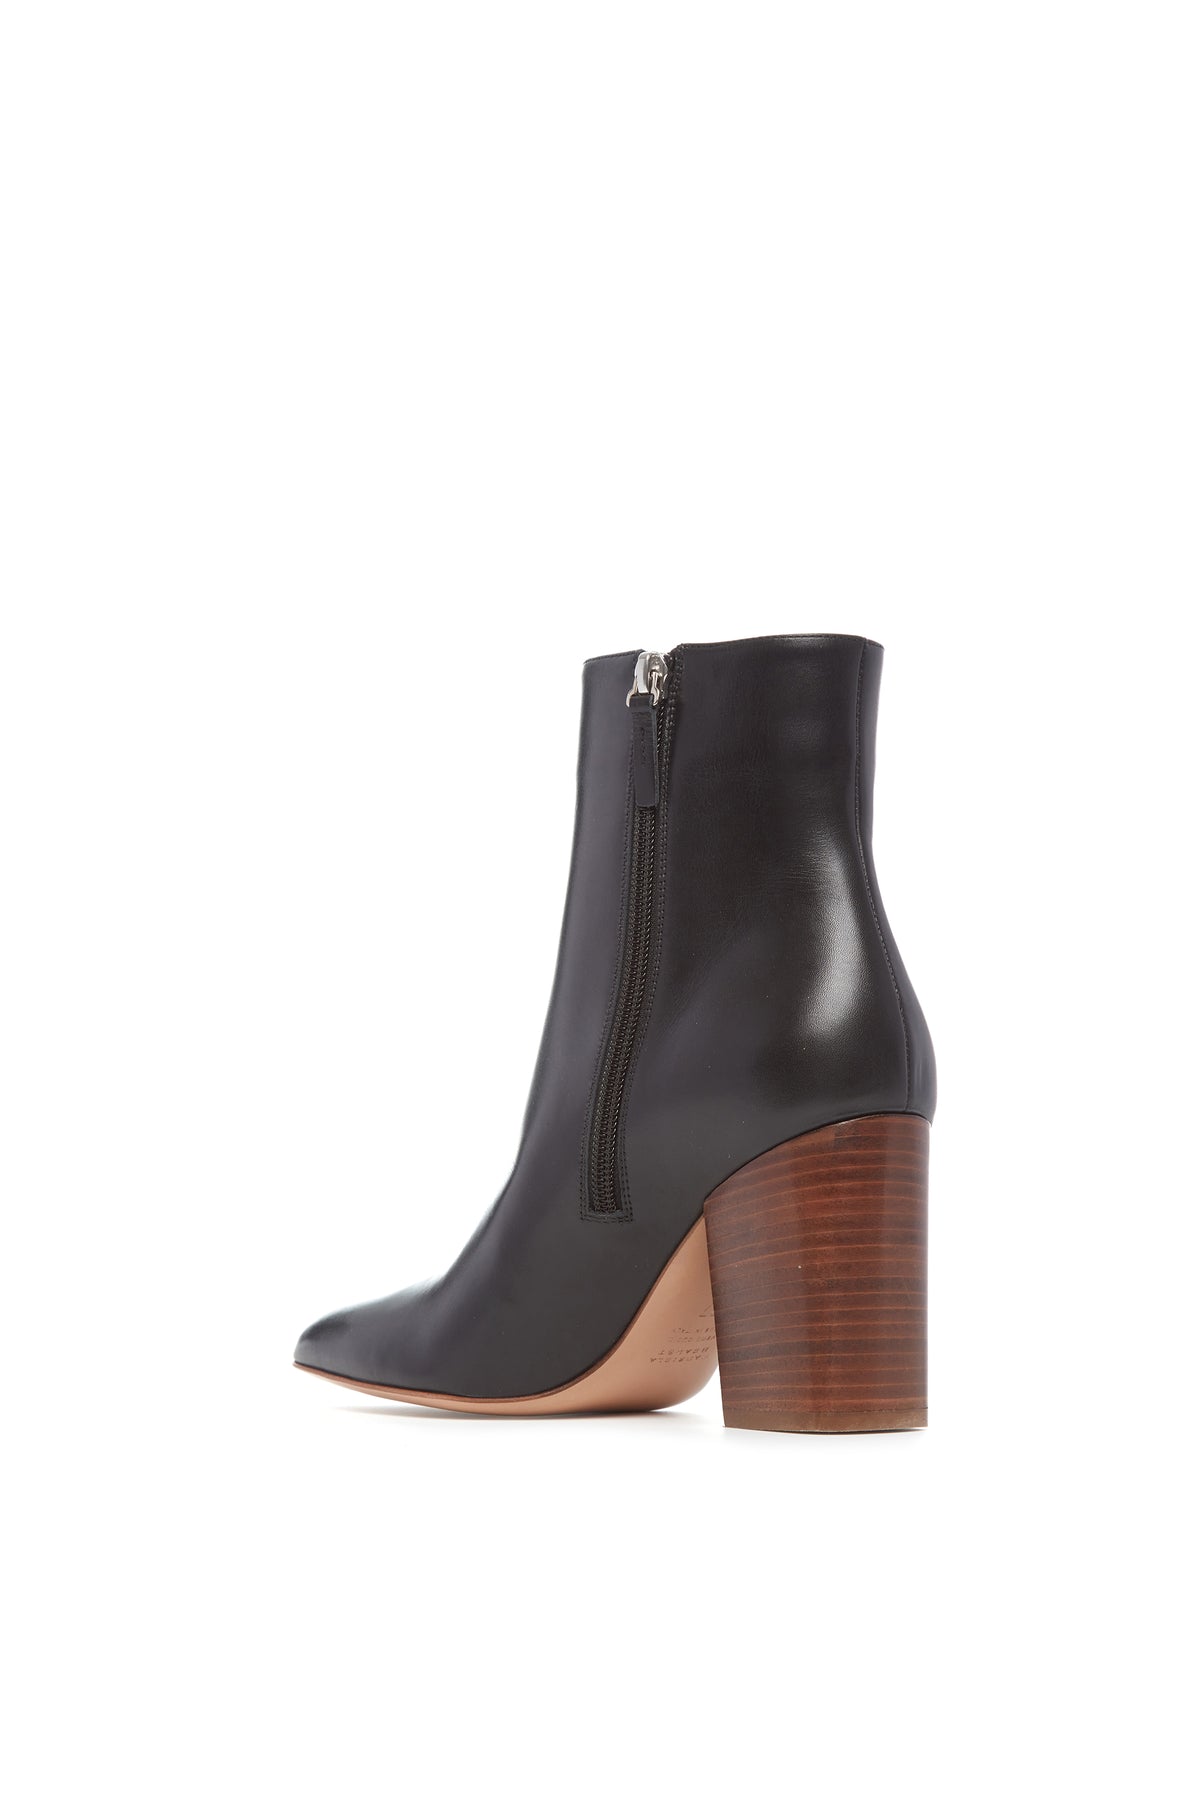 Rio Heeled Boot in Black Leather